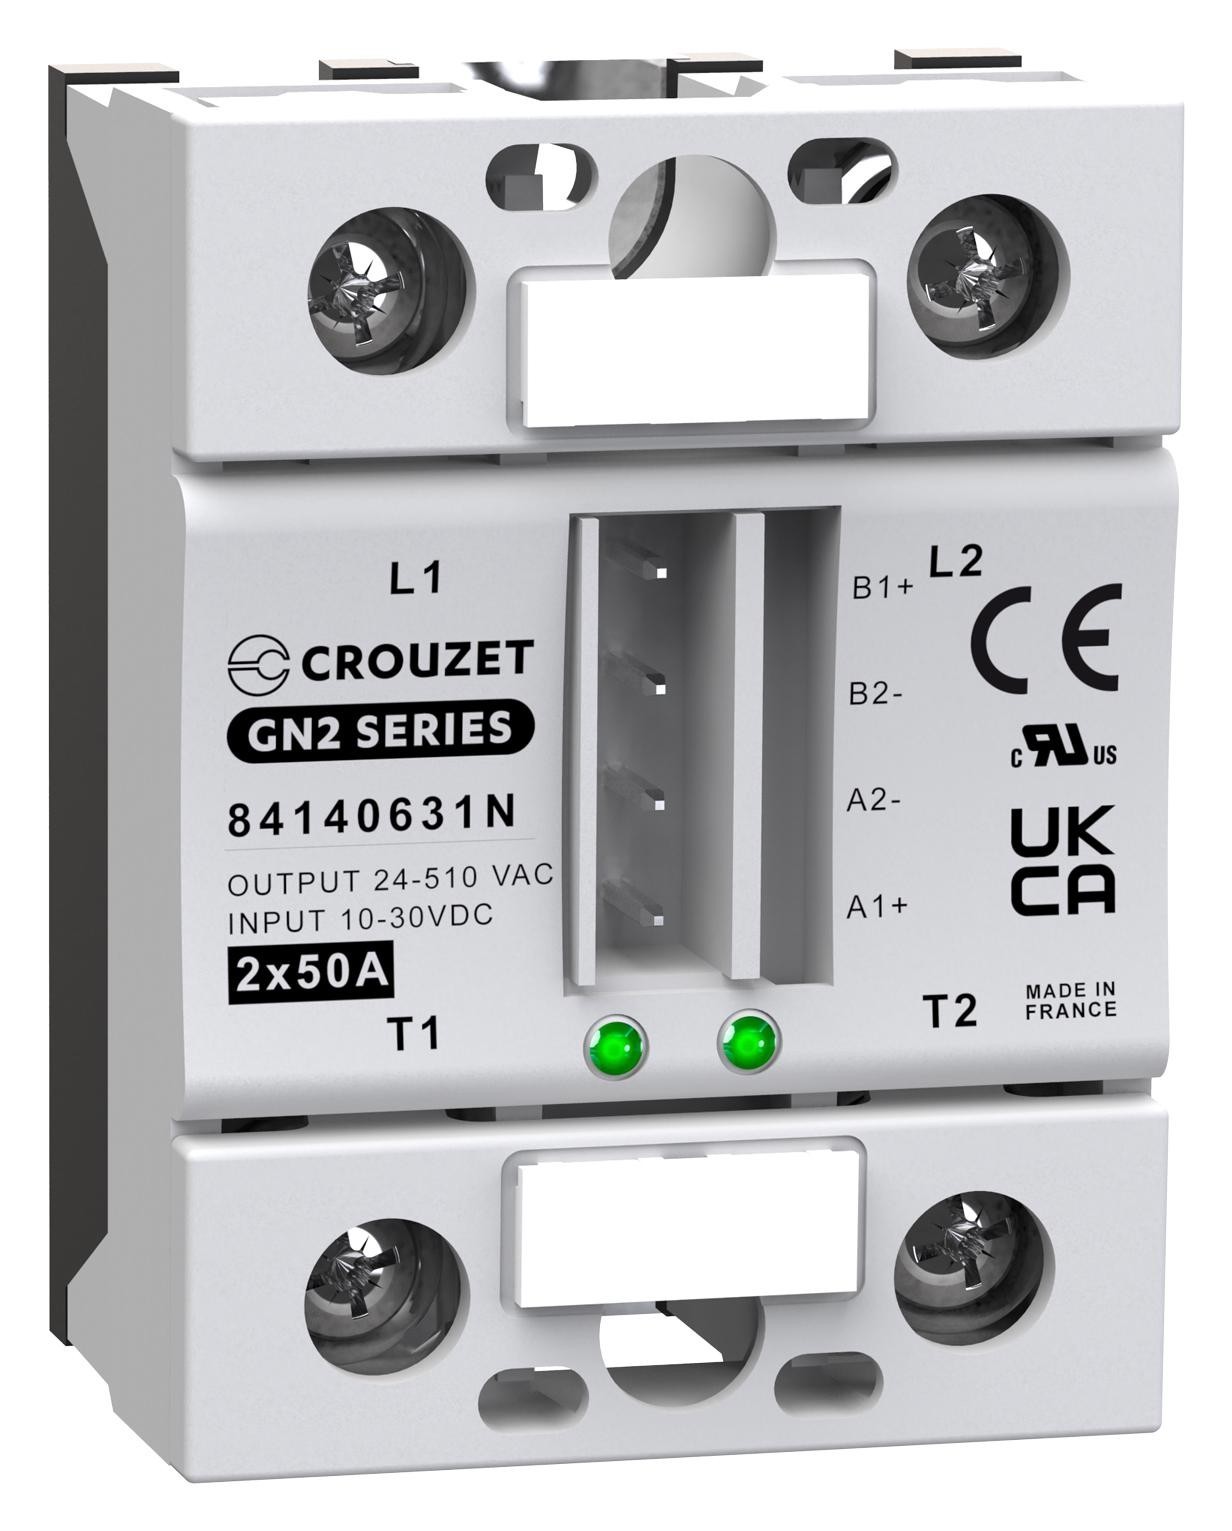 Crouzet 84140631N Solid State Relay, 50A, 10-30Vdc, Panel